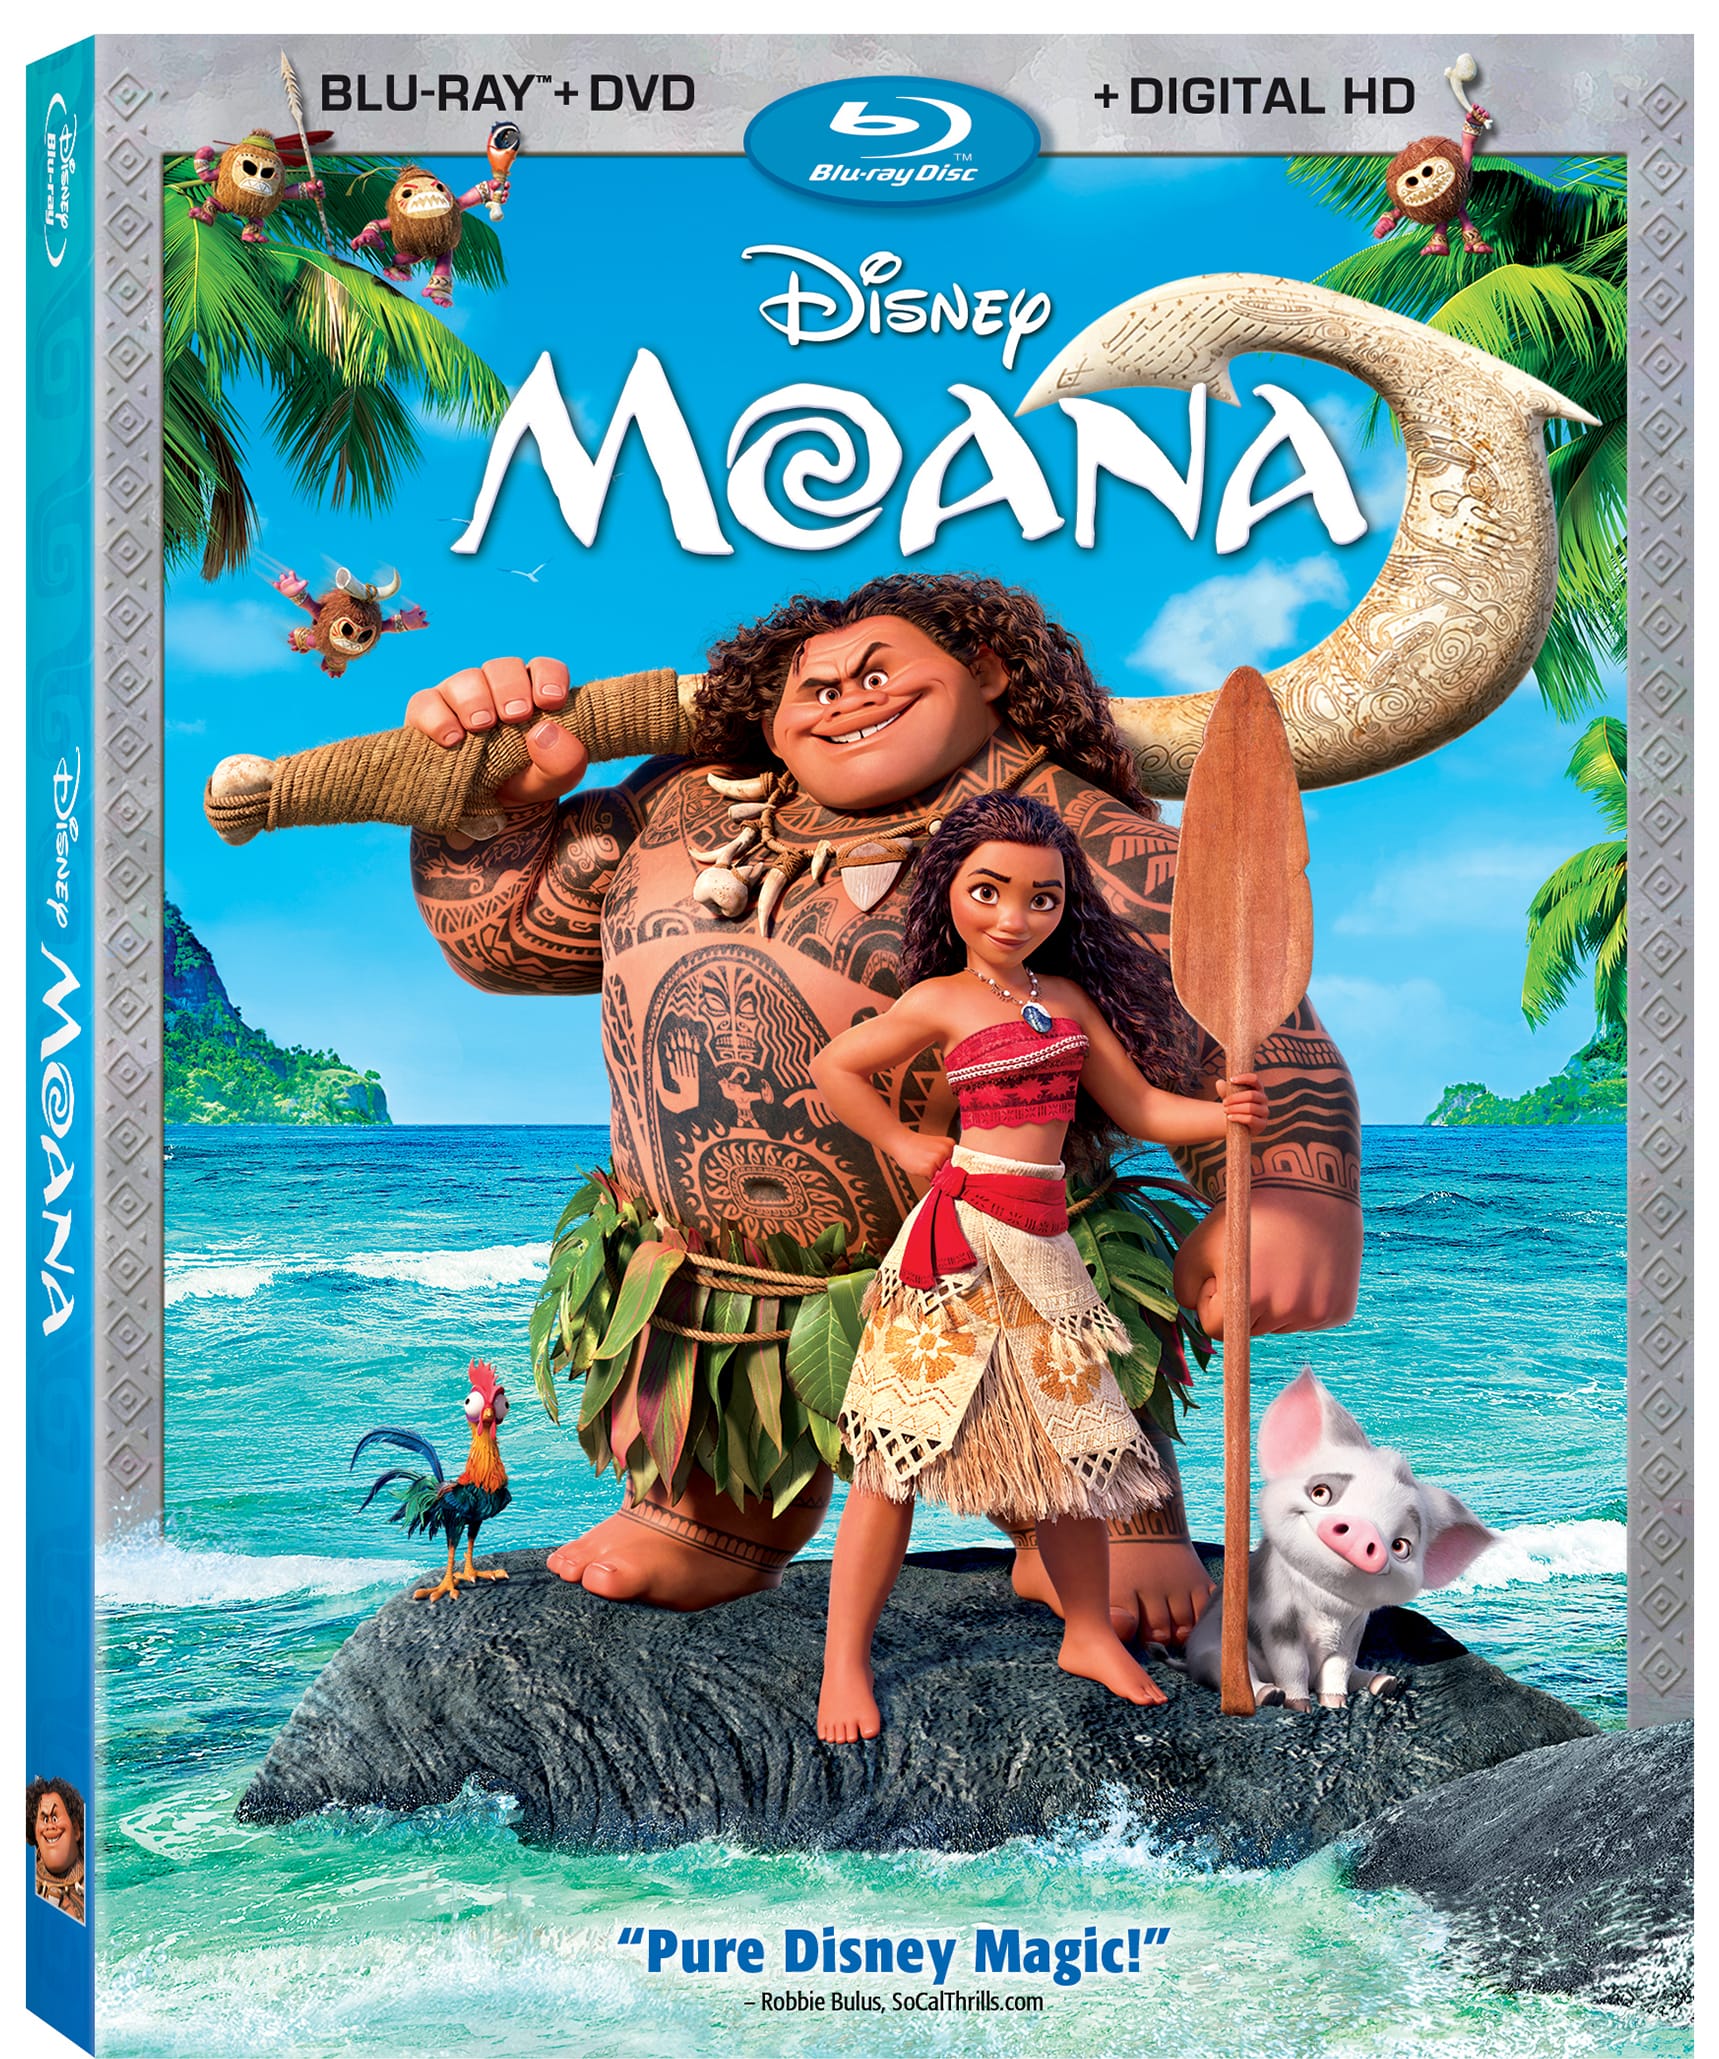 Ready to set sail on a great adventure? Disney’s MOANA Blu-ray is now available with tons of bonus features!